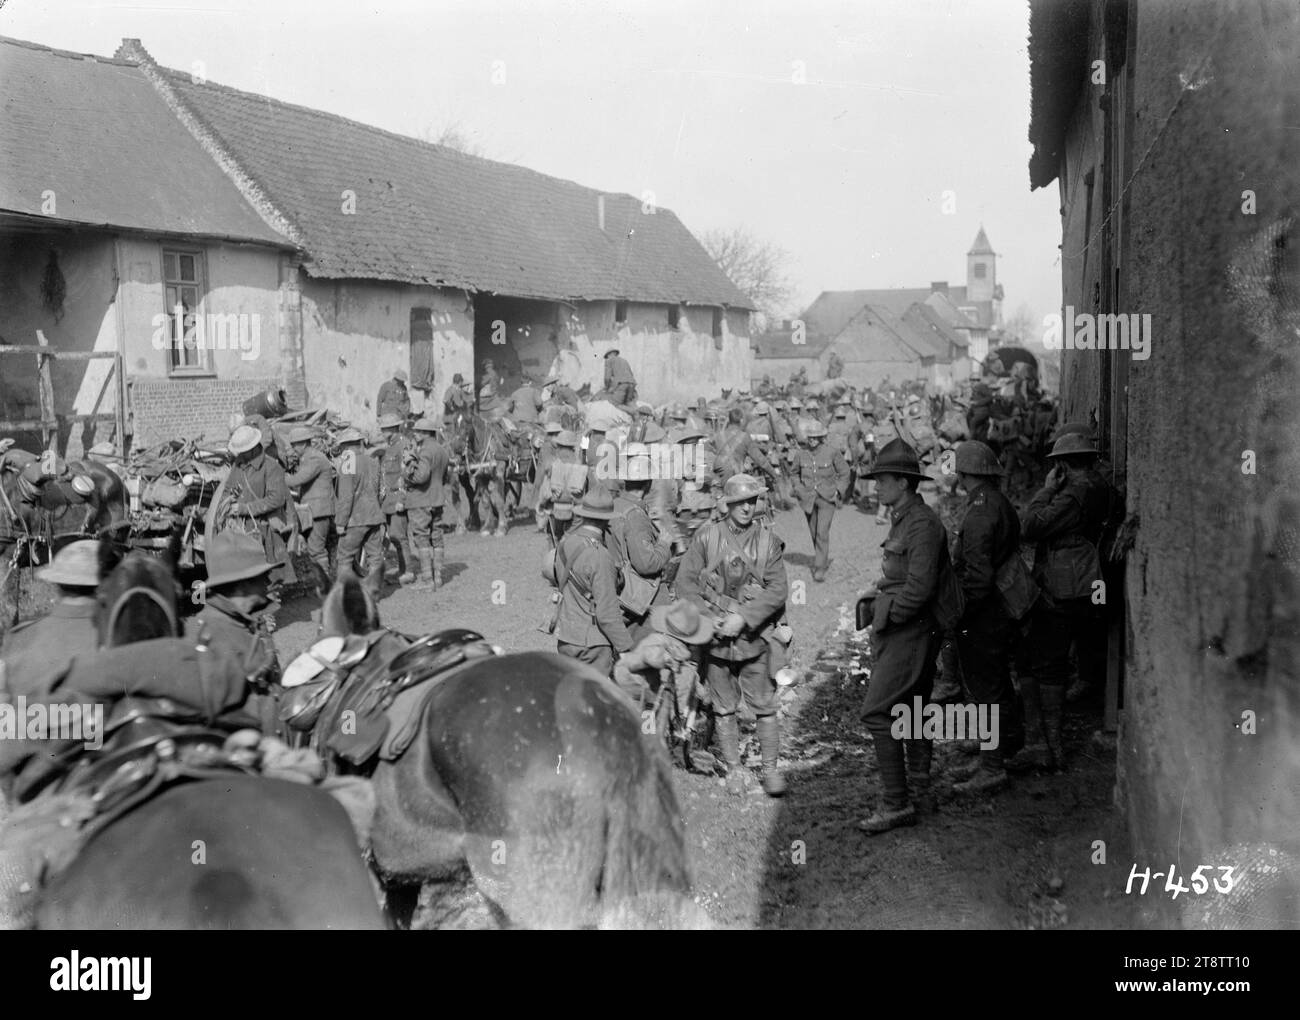 World War I New Zealand soldiers in a French village on the Somme, New Zealand troops in the French village of Bertrancourt on the Somme. They are accompanied by horse transport. Photograph taken 1 April 1918 Stock Photo